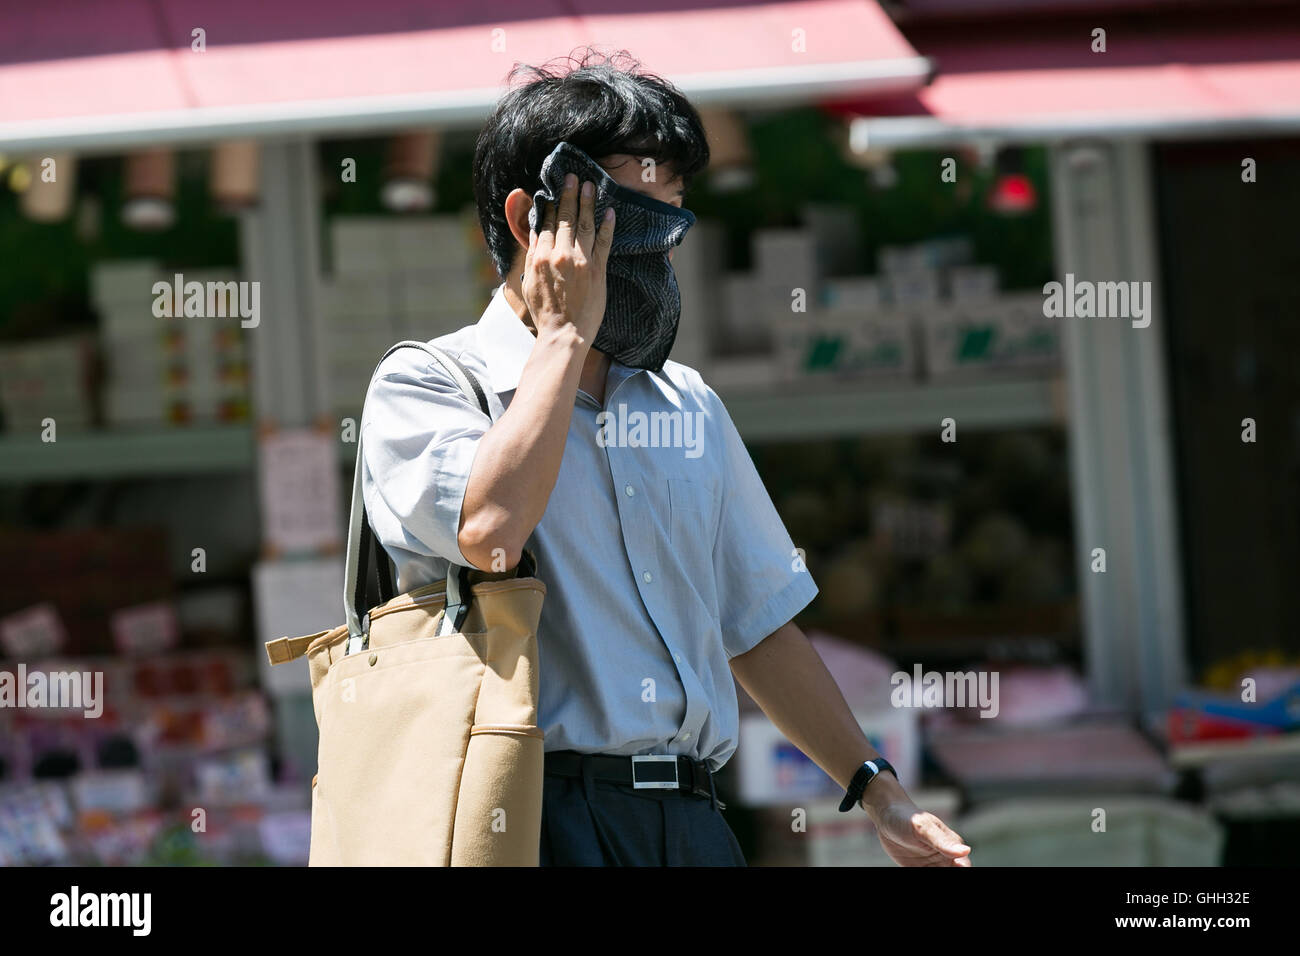 A man wipes his sweat on a hot day in downtown Tokyo on August 5, 2016, Tokyo, Japan. The Japan Meteorological Agency registered temperatures of 35C degrees in Tokyo, making this one of the hottest days of the year. The current heatwave is expected to bring hot days next week across country. The government issued heat stroke warnings because of the high temperatures. © Rodrigo Reyes Marin/AFLO/Alamy Live News Stock Photo